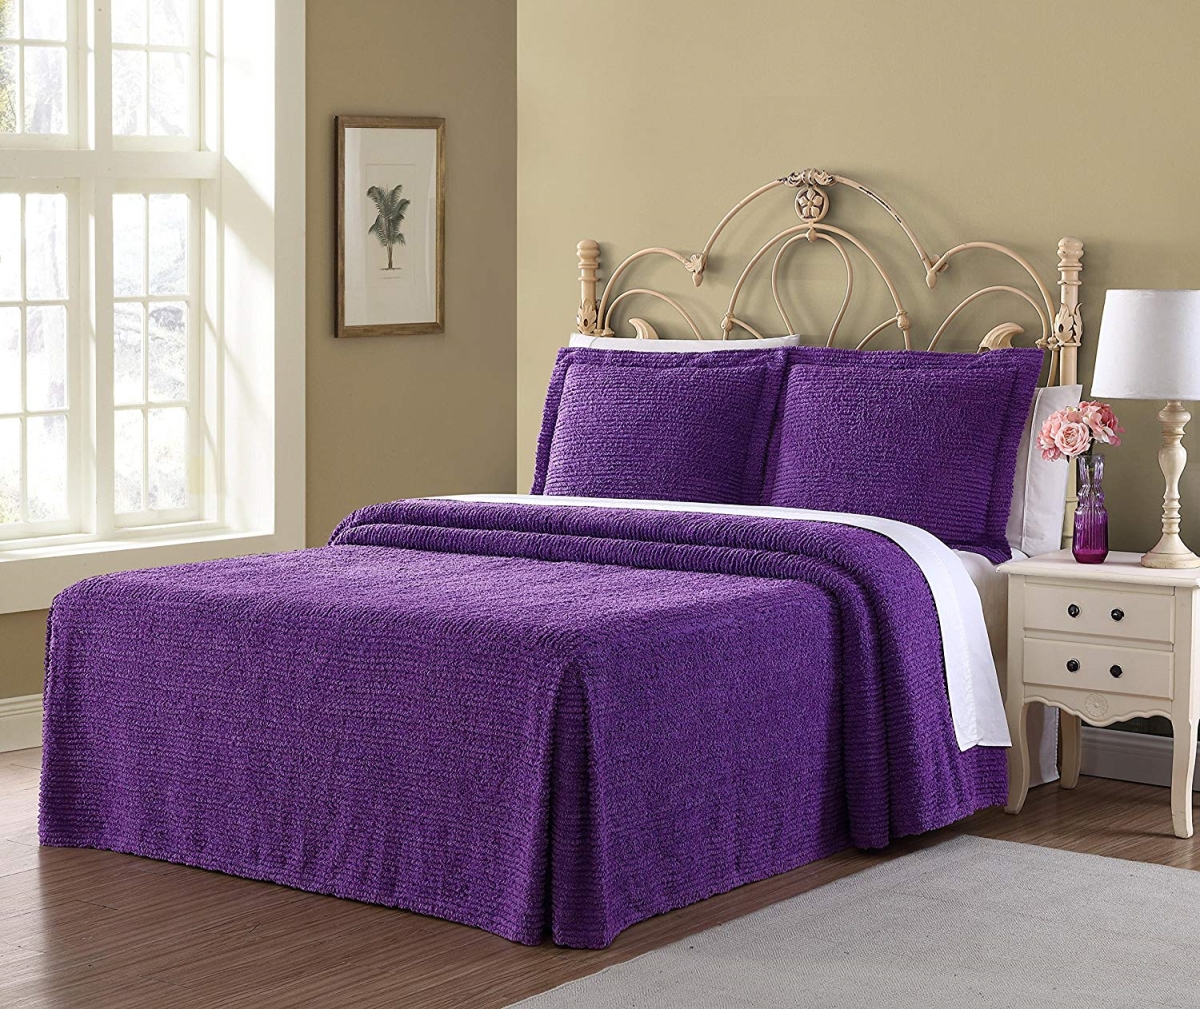 20711803bsp-lil Richland Chenille Solid Bedspread, Purple - Queen Size